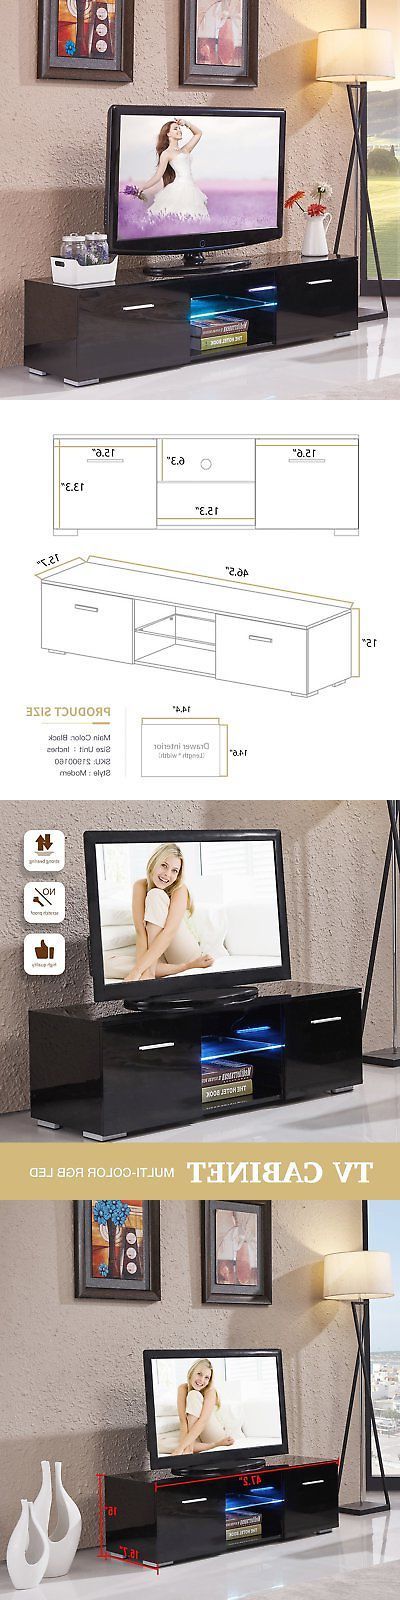 Entertainment Units Tv Stands 20488: 2 Drawers High Gloss Within Tv Stands With 2 Open Shelves 2 Drawers High Gloss Tv Unis (View 15 of 20)